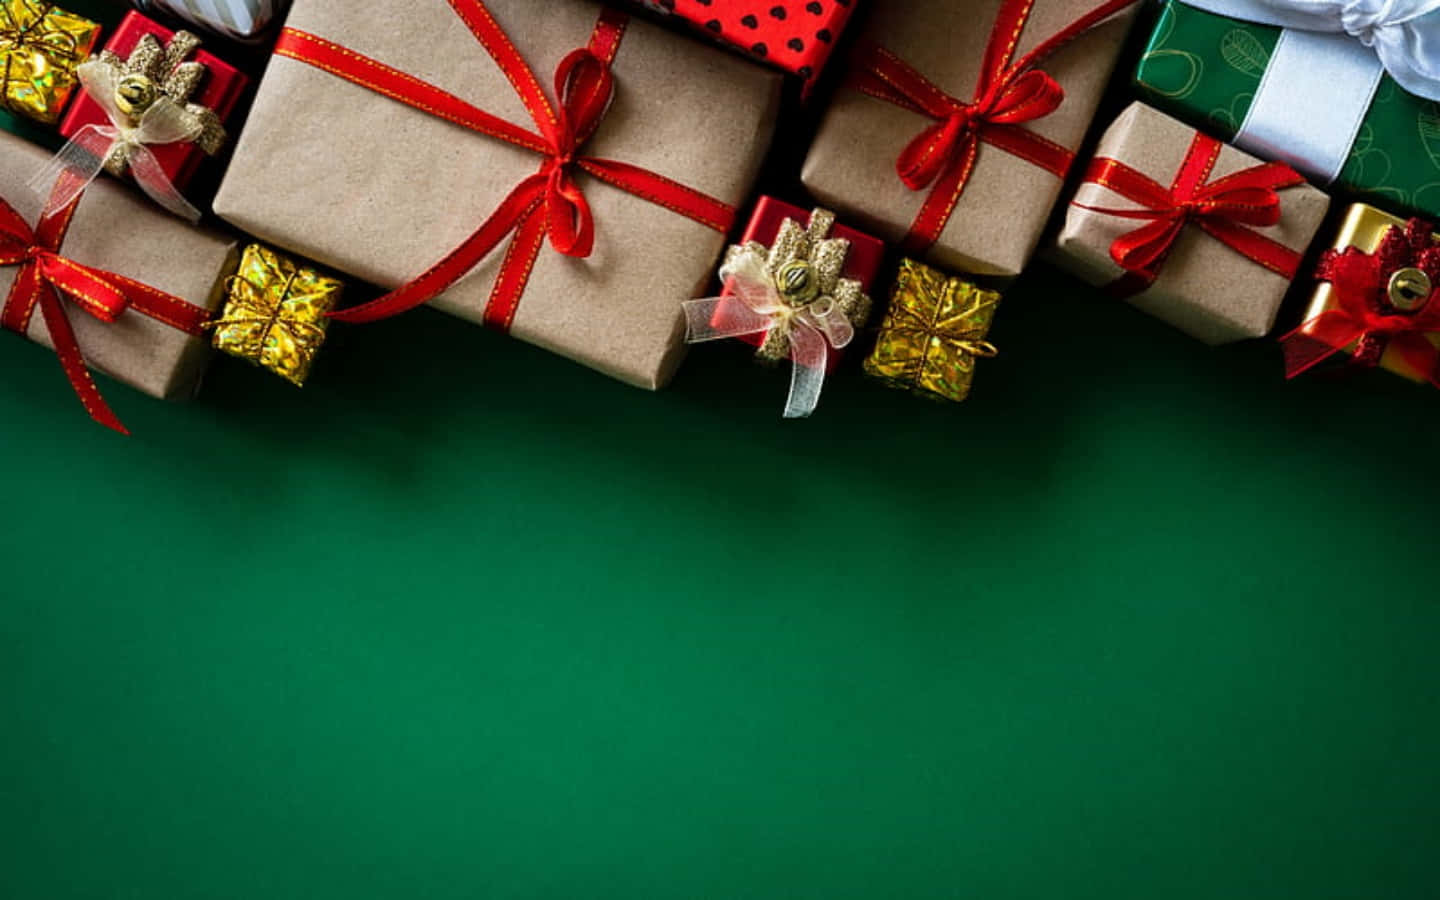 Christmas Gifts On Green Picture